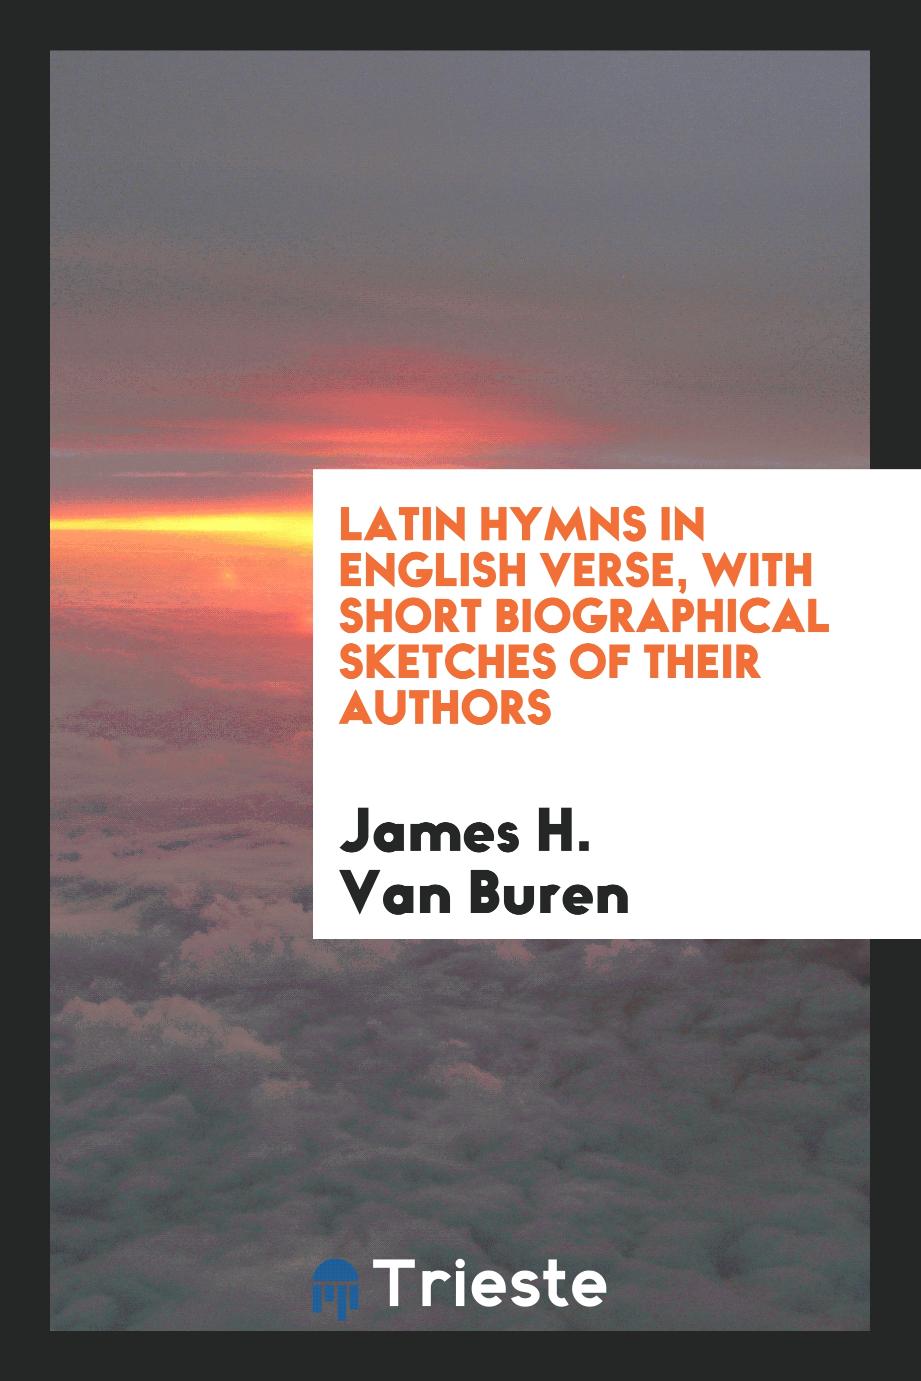 Latin hymns in English verse, with short biographical sketches of their authors